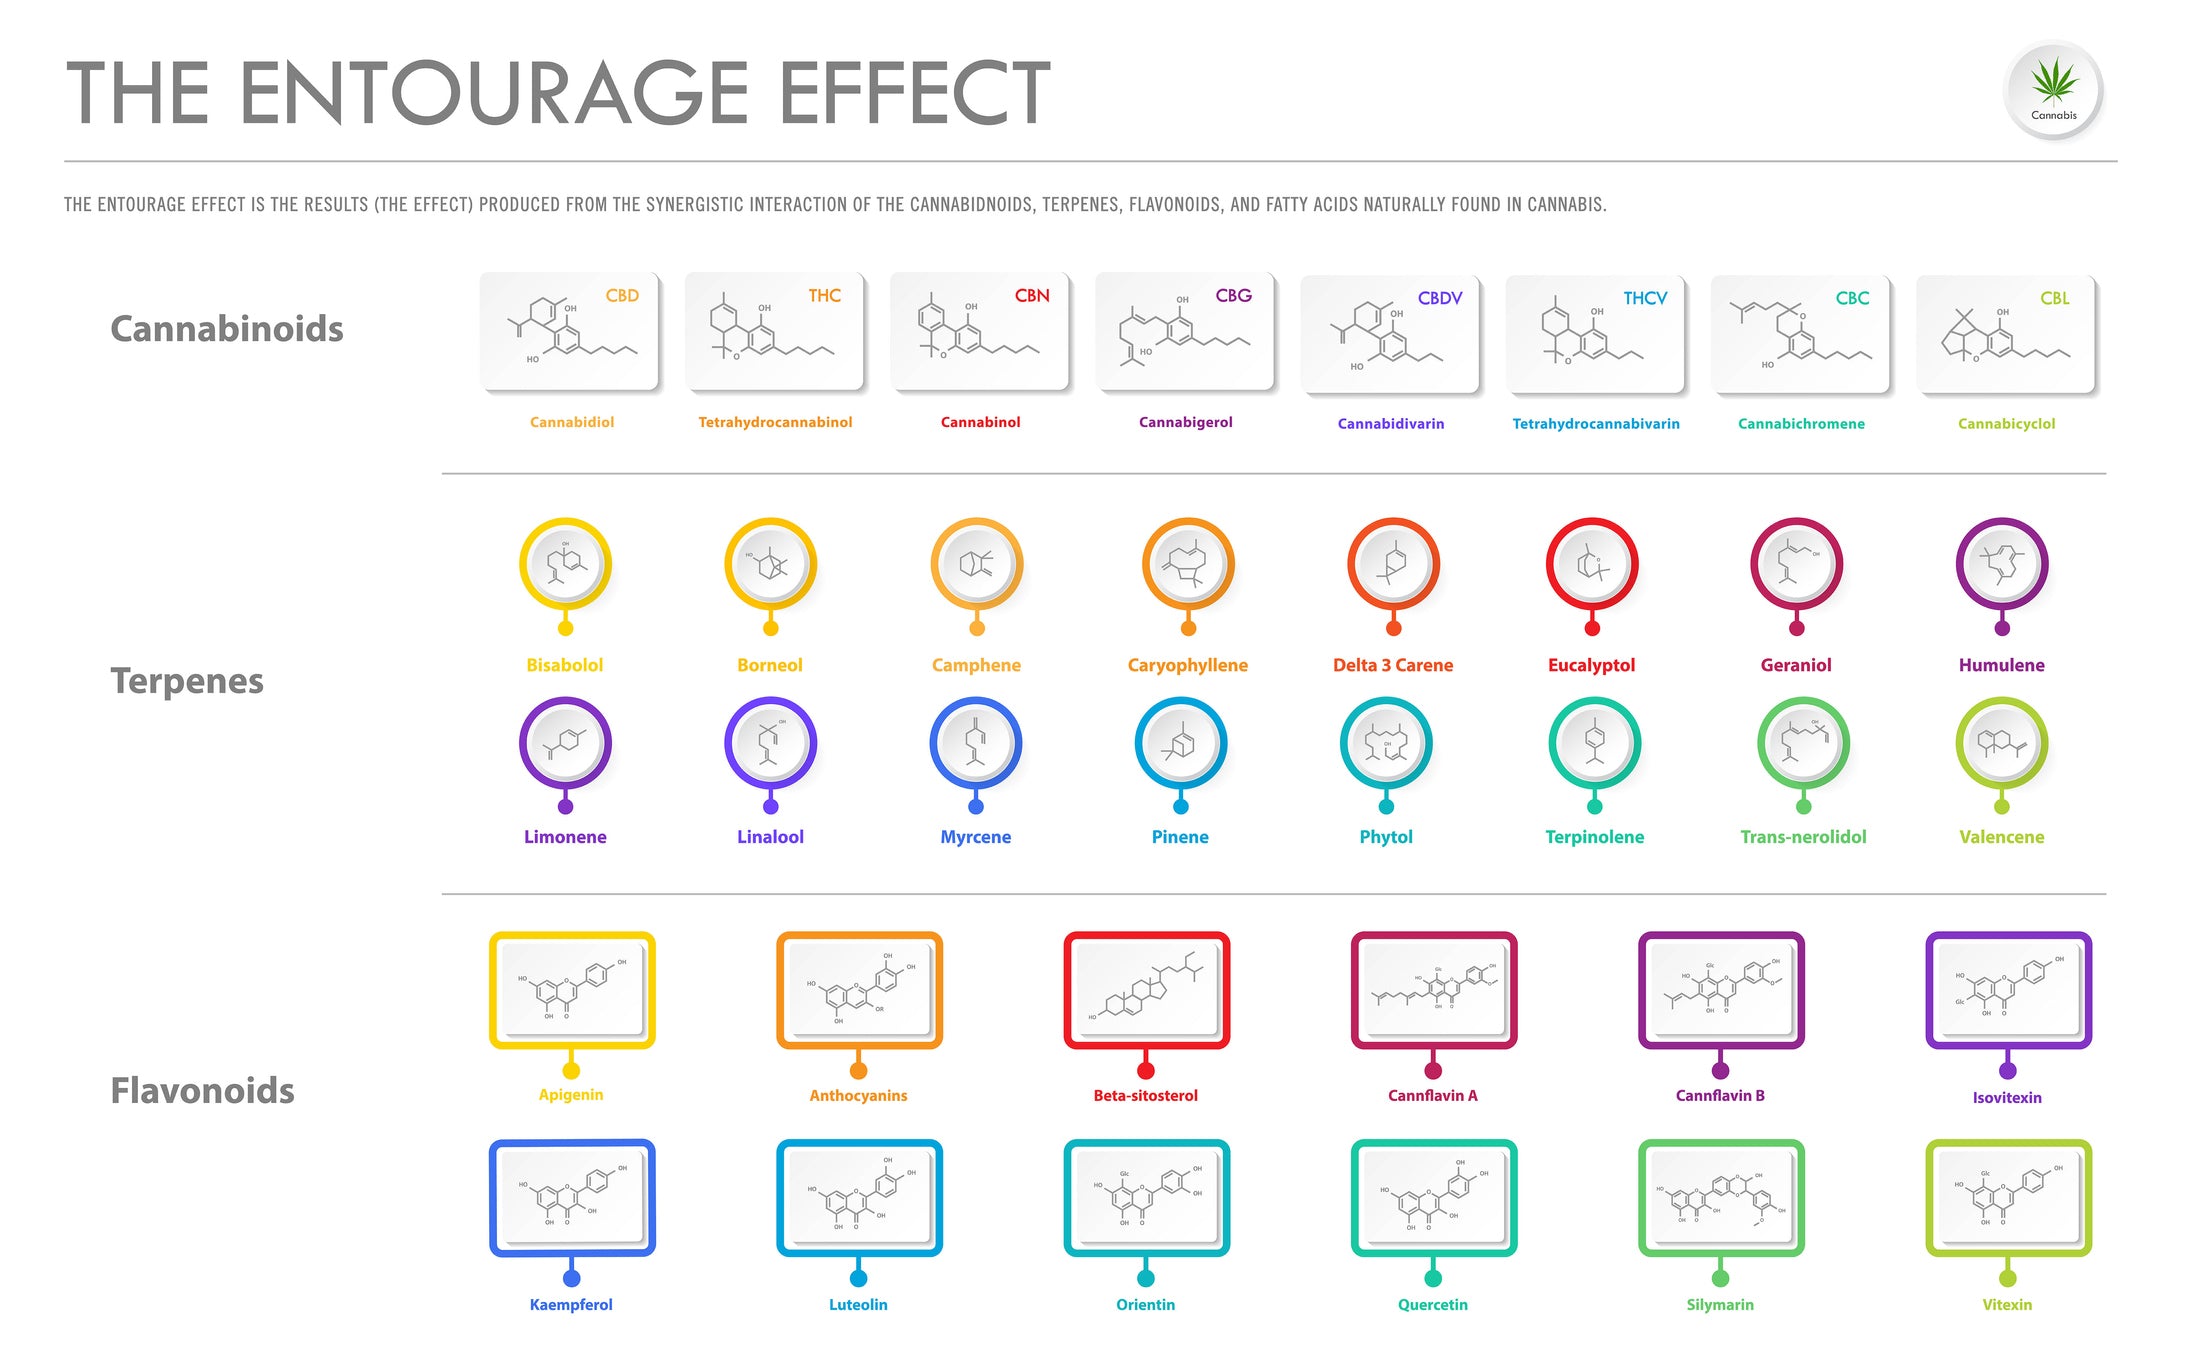 A chart of the entourage effect shows the chemical compounds of cannabinoids, flavonoids, and cannabis terpenes.